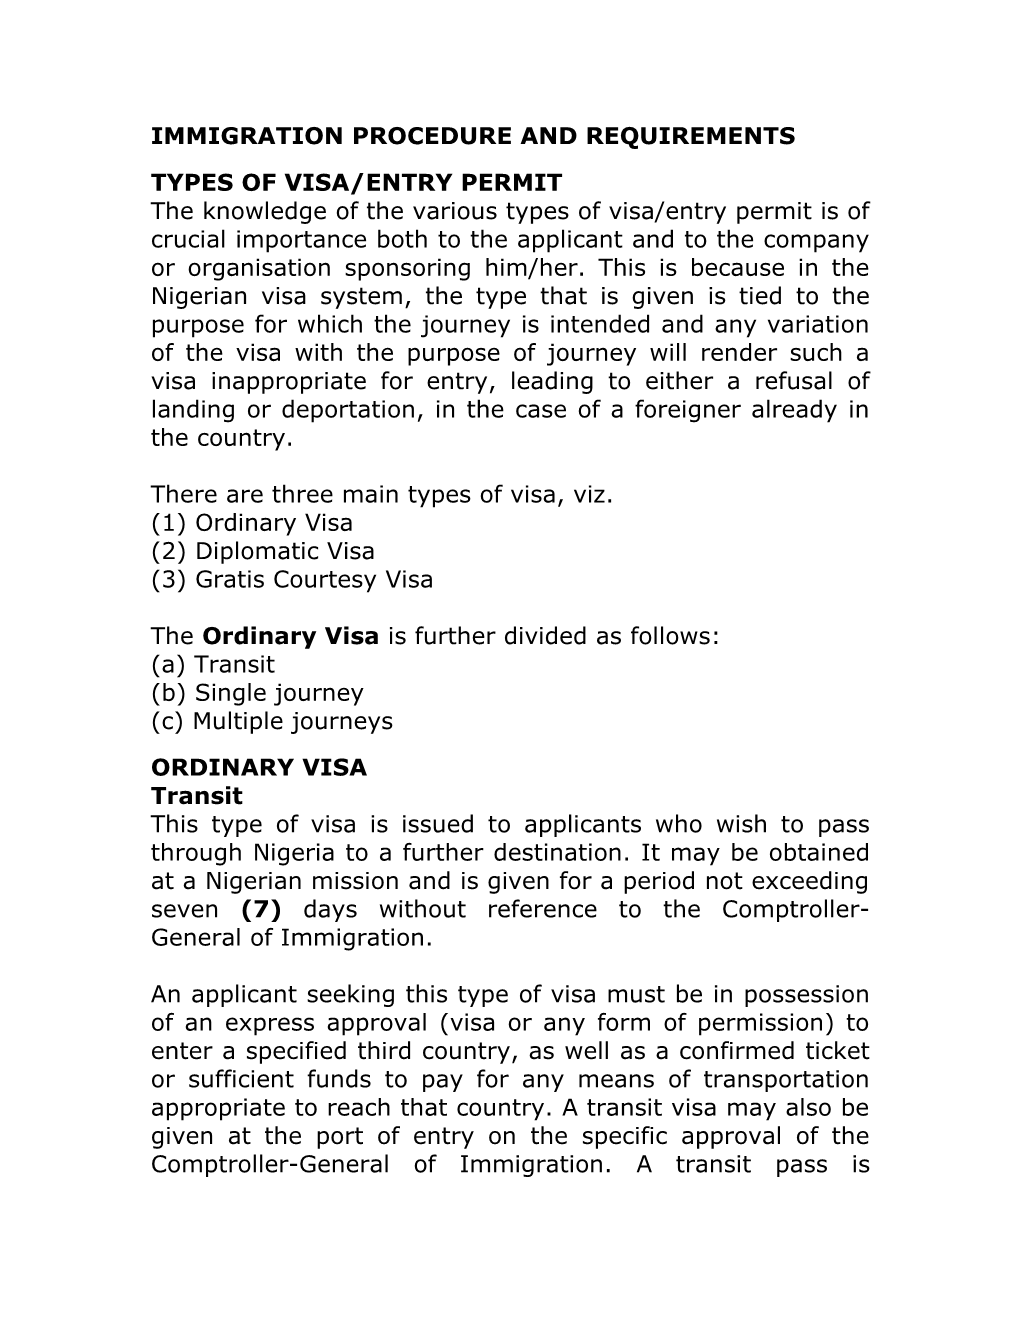 Immigration Procedure and Requirements